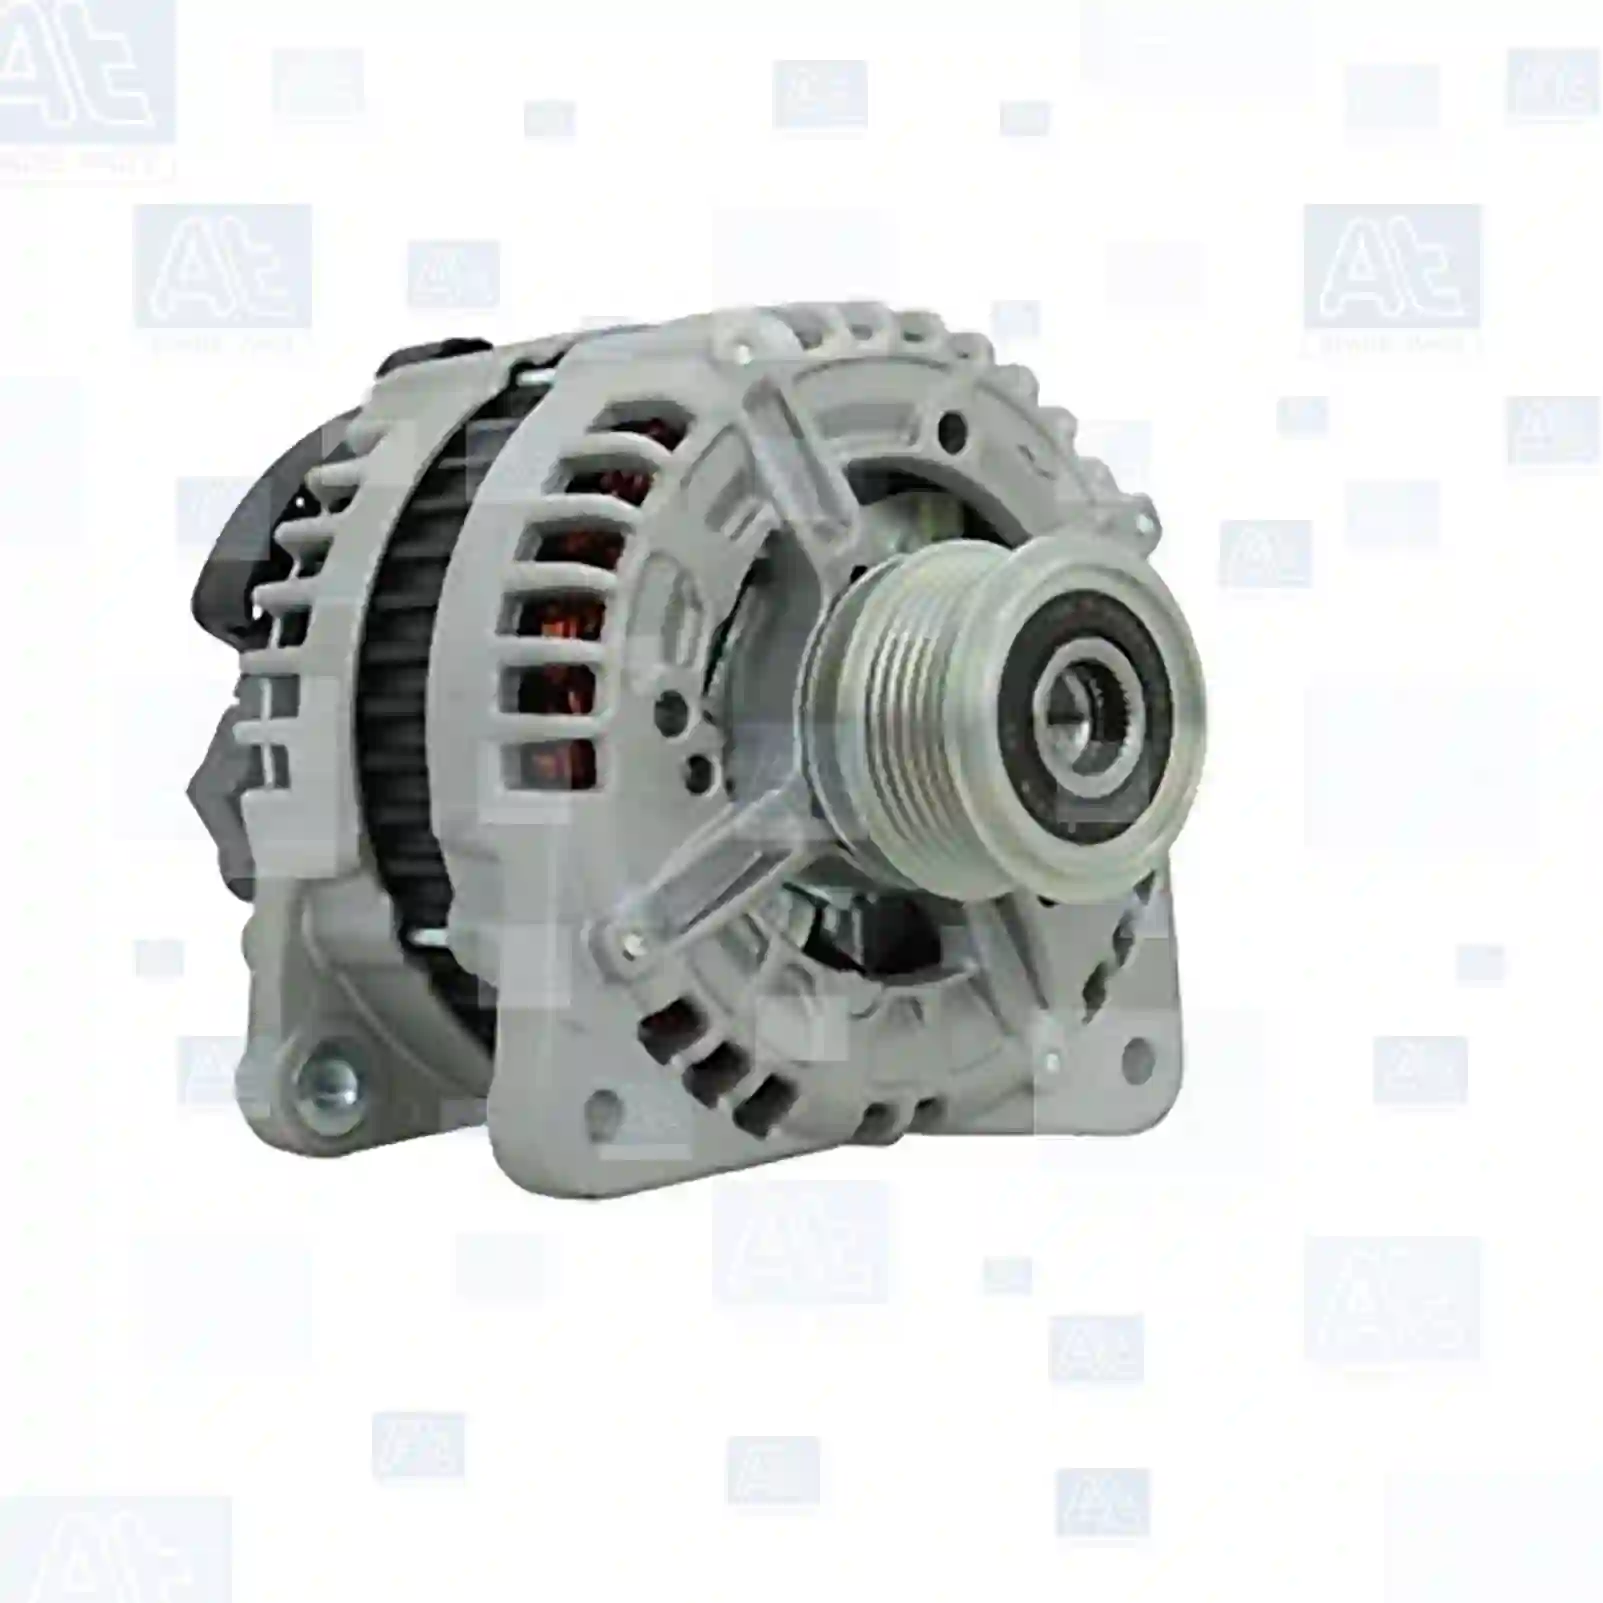 Alternator, 77710038, 021903026G, 021903026L, 022903028B, 03G903023, 03L903023E, 4801715AA, 021903026G, 021903026L, 022903028B, 03G903023, 03L903023E, 021903026G, 021903026L, 022903028B, 03G903023, 03L903023E, 021903026B, 021903026G, 021903026GX, 021903026L, 021903026LX, 022903028B, 03G903023, 03G903023E, 03G903023X, 03L903023E, 03L903023EX, 03L903024J, 21903026LX ||  77710038 At Spare Part | Engine, Accelerator Pedal, Camshaft, Connecting Rod, Crankcase, Crankshaft, Cylinder Head, Engine Suspension Mountings, Exhaust Manifold, Exhaust Gas Recirculation, Filter Kits, Flywheel Housing, General Overhaul Kits, Engine, Intake Manifold, Oil Cleaner, Oil Cooler, Oil Filter, Oil Pump, Oil Sump, Piston & Liner, Sensor & Switch, Timing Case, Turbocharger, Cooling System, Belt Tensioner, Coolant Filter, Coolant Pipe, Corrosion Prevention Agent, Drive, Expansion Tank, Fan, Intercooler, Monitors & Gauges, Radiator, Thermostat, V-Belt / Timing belt, Water Pump, Fuel System, Electronical Injector Unit, Feed Pump, Fuel Filter, cpl., Fuel Gauge Sender,  Fuel Line, Fuel Pump, Fuel Tank, Injection Line Kit, Injection Pump, Exhaust System, Clutch & Pedal, Gearbox, Propeller Shaft, Axles, Brake System, Hubs & Wheels, Suspension, Leaf Spring, Universal Parts / Accessories, Steering, Electrical System, Cabin Alternator, 77710038, 021903026G, 021903026L, 022903028B, 03G903023, 03L903023E, 4801715AA, 021903026G, 021903026L, 022903028B, 03G903023, 03L903023E, 021903026G, 021903026L, 022903028B, 03G903023, 03L903023E, 021903026B, 021903026G, 021903026GX, 021903026L, 021903026LX, 022903028B, 03G903023, 03G903023E, 03G903023X, 03L903023E, 03L903023EX, 03L903024J, 21903026LX ||  77710038 At Spare Part | Engine, Accelerator Pedal, Camshaft, Connecting Rod, Crankcase, Crankshaft, Cylinder Head, Engine Suspension Mountings, Exhaust Manifold, Exhaust Gas Recirculation, Filter Kits, Flywheel Housing, General Overhaul Kits, Engine, Intake Manifold, Oil Cleaner, Oil Cooler, Oil Filter, Oil Pump, Oil Sump, Piston & Liner, Sensor & Switch, Timing Case, Turbocharger, Cooling System, Belt Tensioner, Coolant Filter, Coolant Pipe, Corrosion Prevention Agent, Drive, Expansion Tank, Fan, Intercooler, Monitors & Gauges, Radiator, Thermostat, V-Belt / Timing belt, Water Pump, Fuel System, Electronical Injector Unit, Feed Pump, Fuel Filter, cpl., Fuel Gauge Sender,  Fuel Line, Fuel Pump, Fuel Tank, Injection Line Kit, Injection Pump, Exhaust System, Clutch & Pedal, Gearbox, Propeller Shaft, Axles, Brake System, Hubs & Wheels, Suspension, Leaf Spring, Universal Parts / Accessories, Steering, Electrical System, Cabin